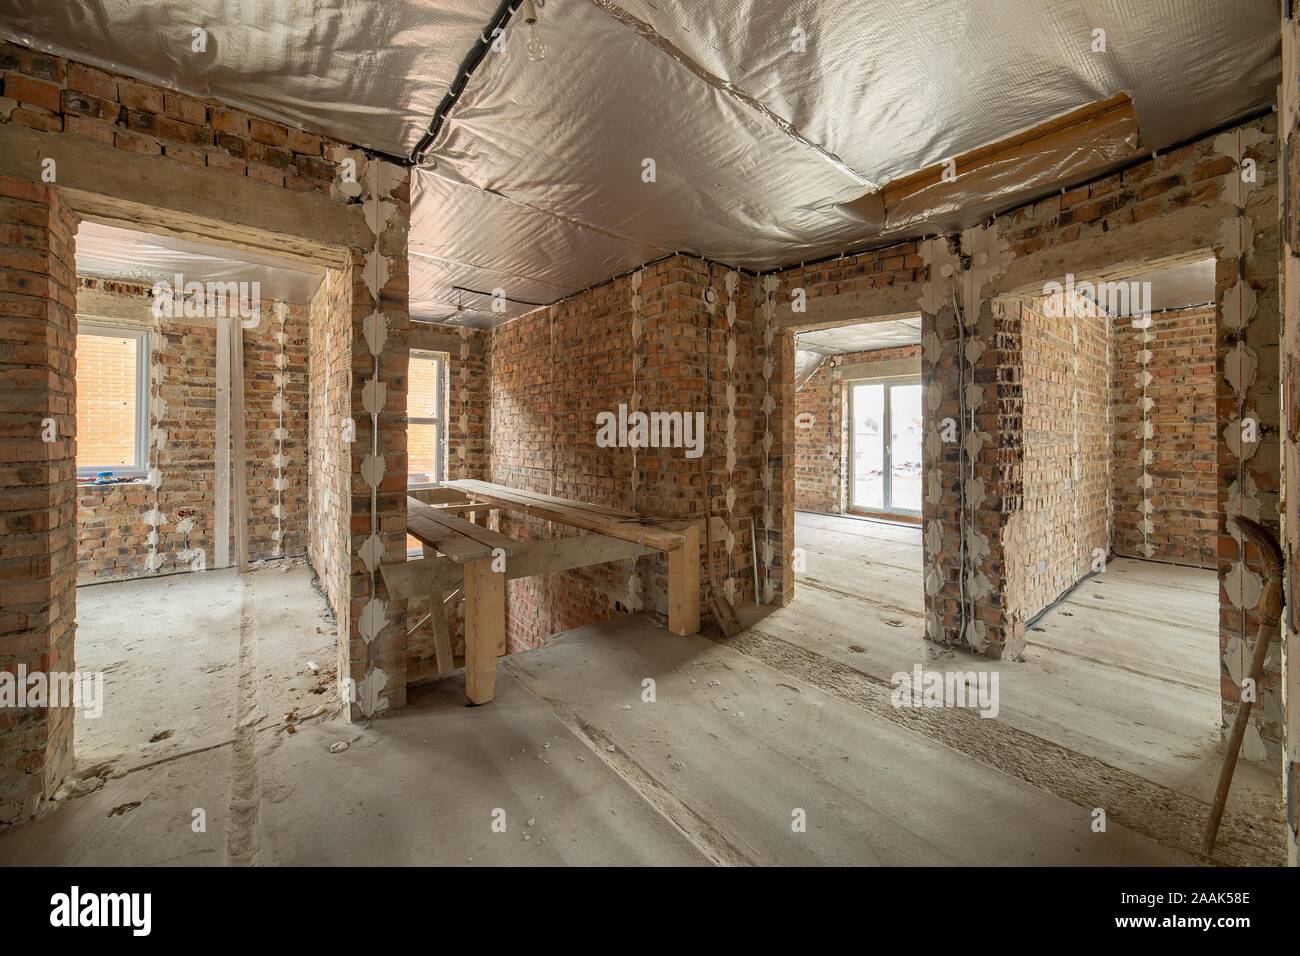 Interior Of Unfinished Brick House With Concrete Floor And